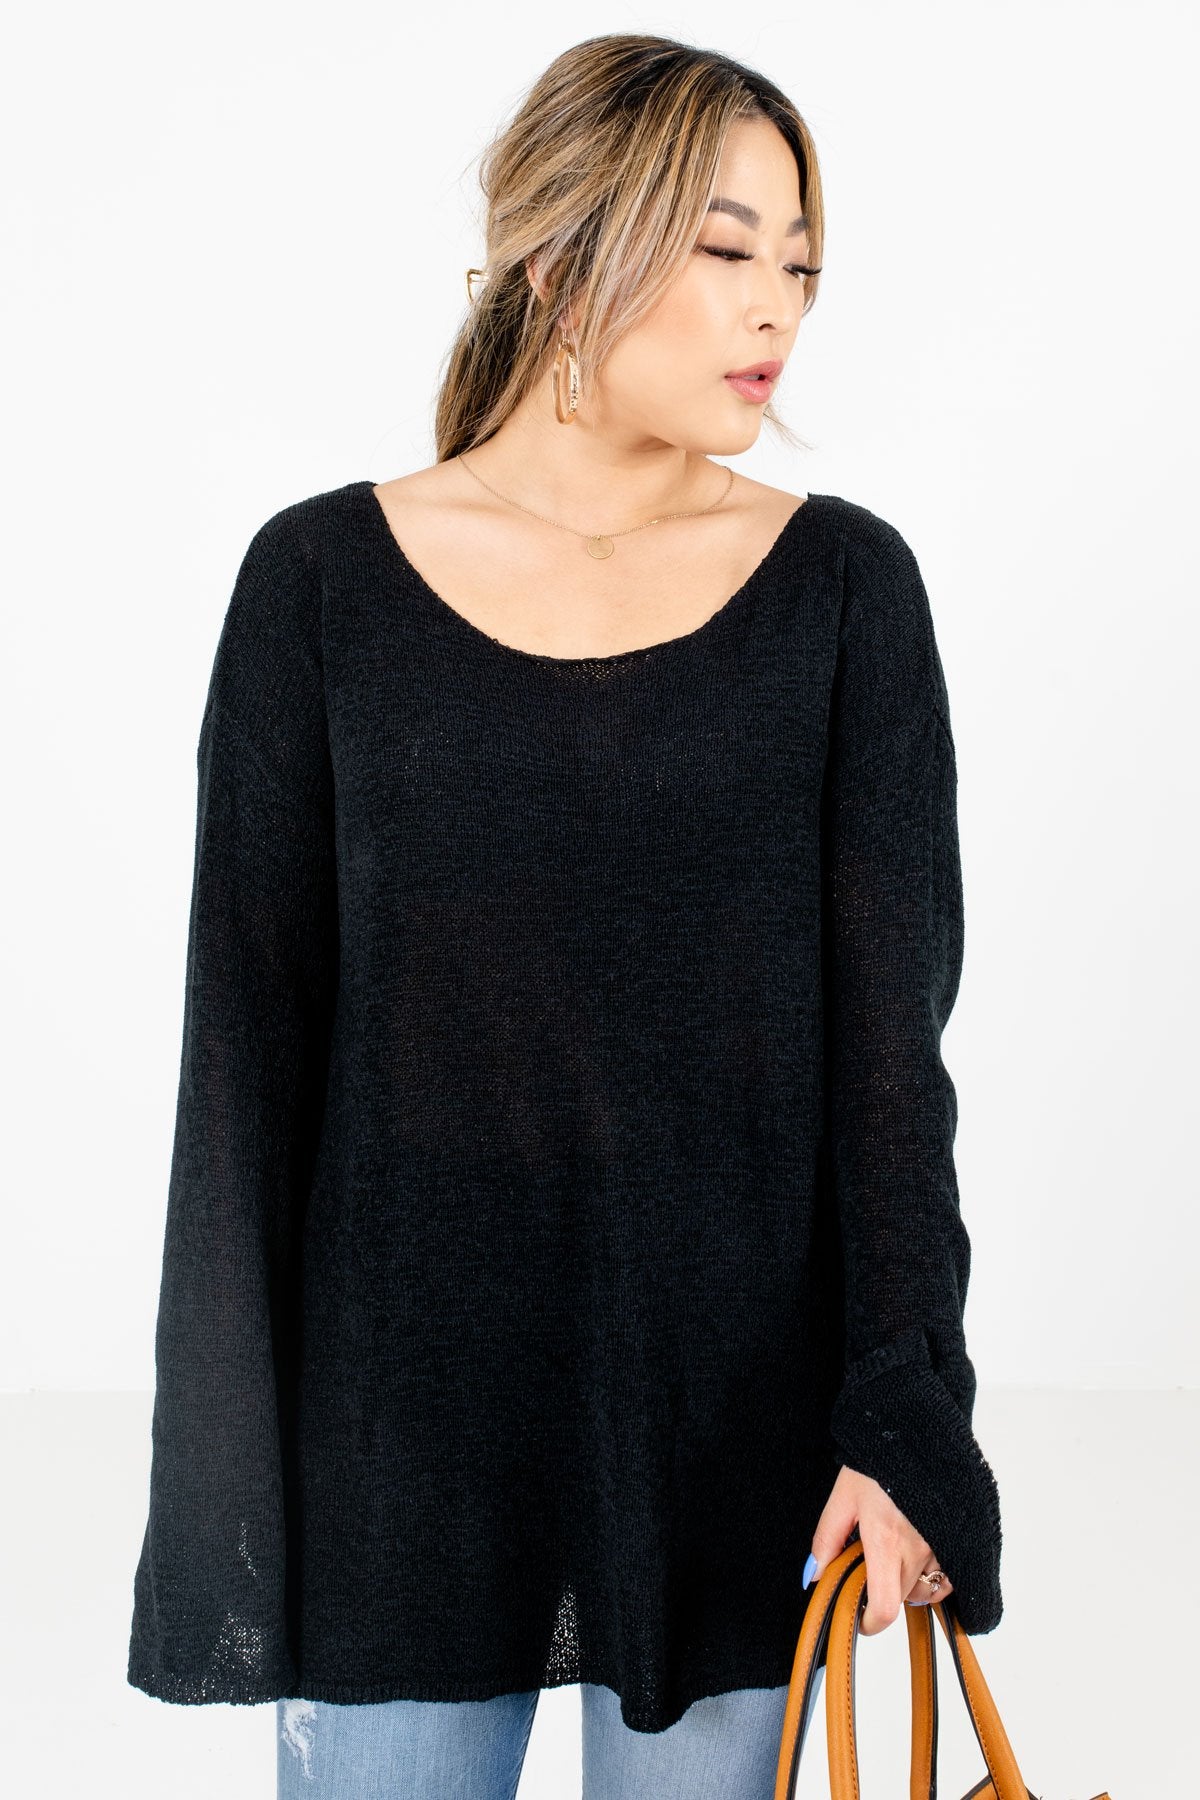 Women’s Black Casual Everyday Boutique Sweaters